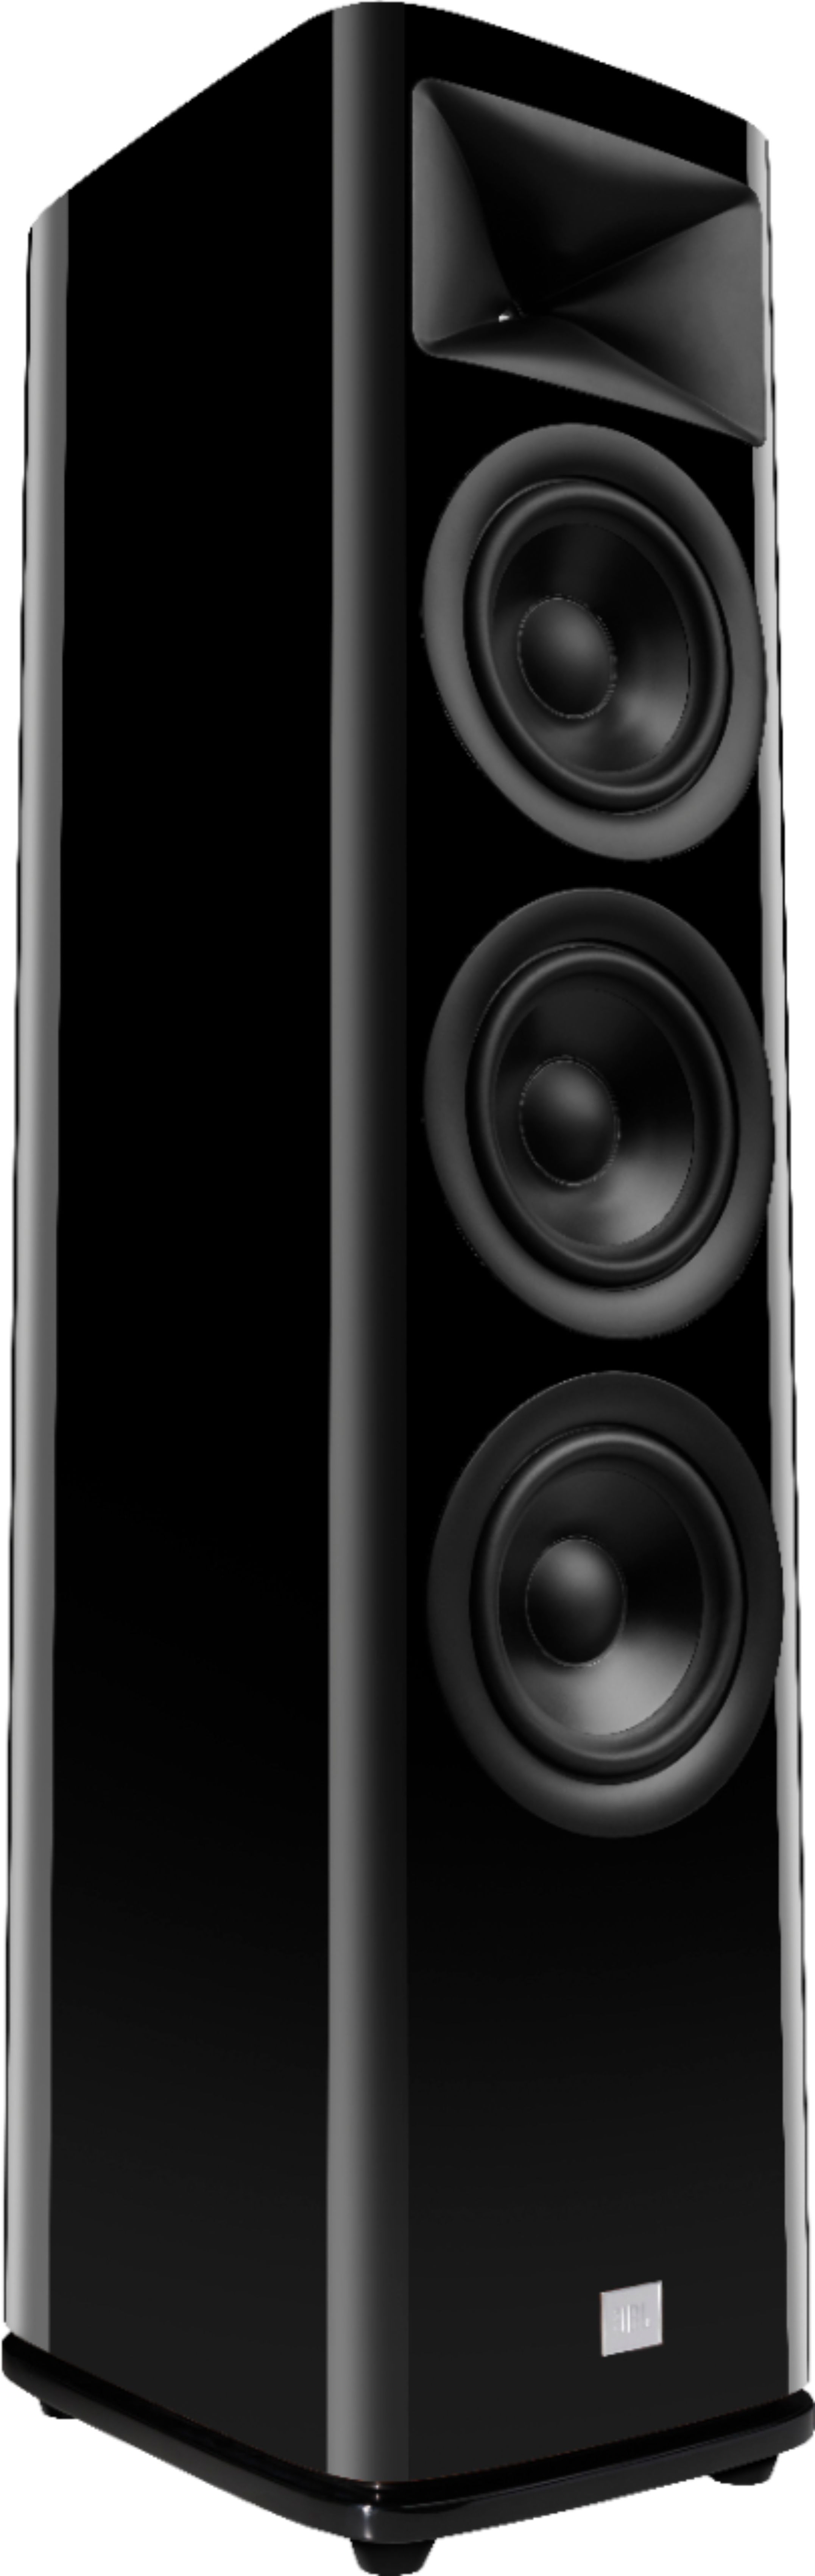 Angle View: JBL - HDI3600 Triple 6.5-inch 2-1/2 way Floorstanding Loudspeaker with 1" compression tweeter - Gloss Black Finish